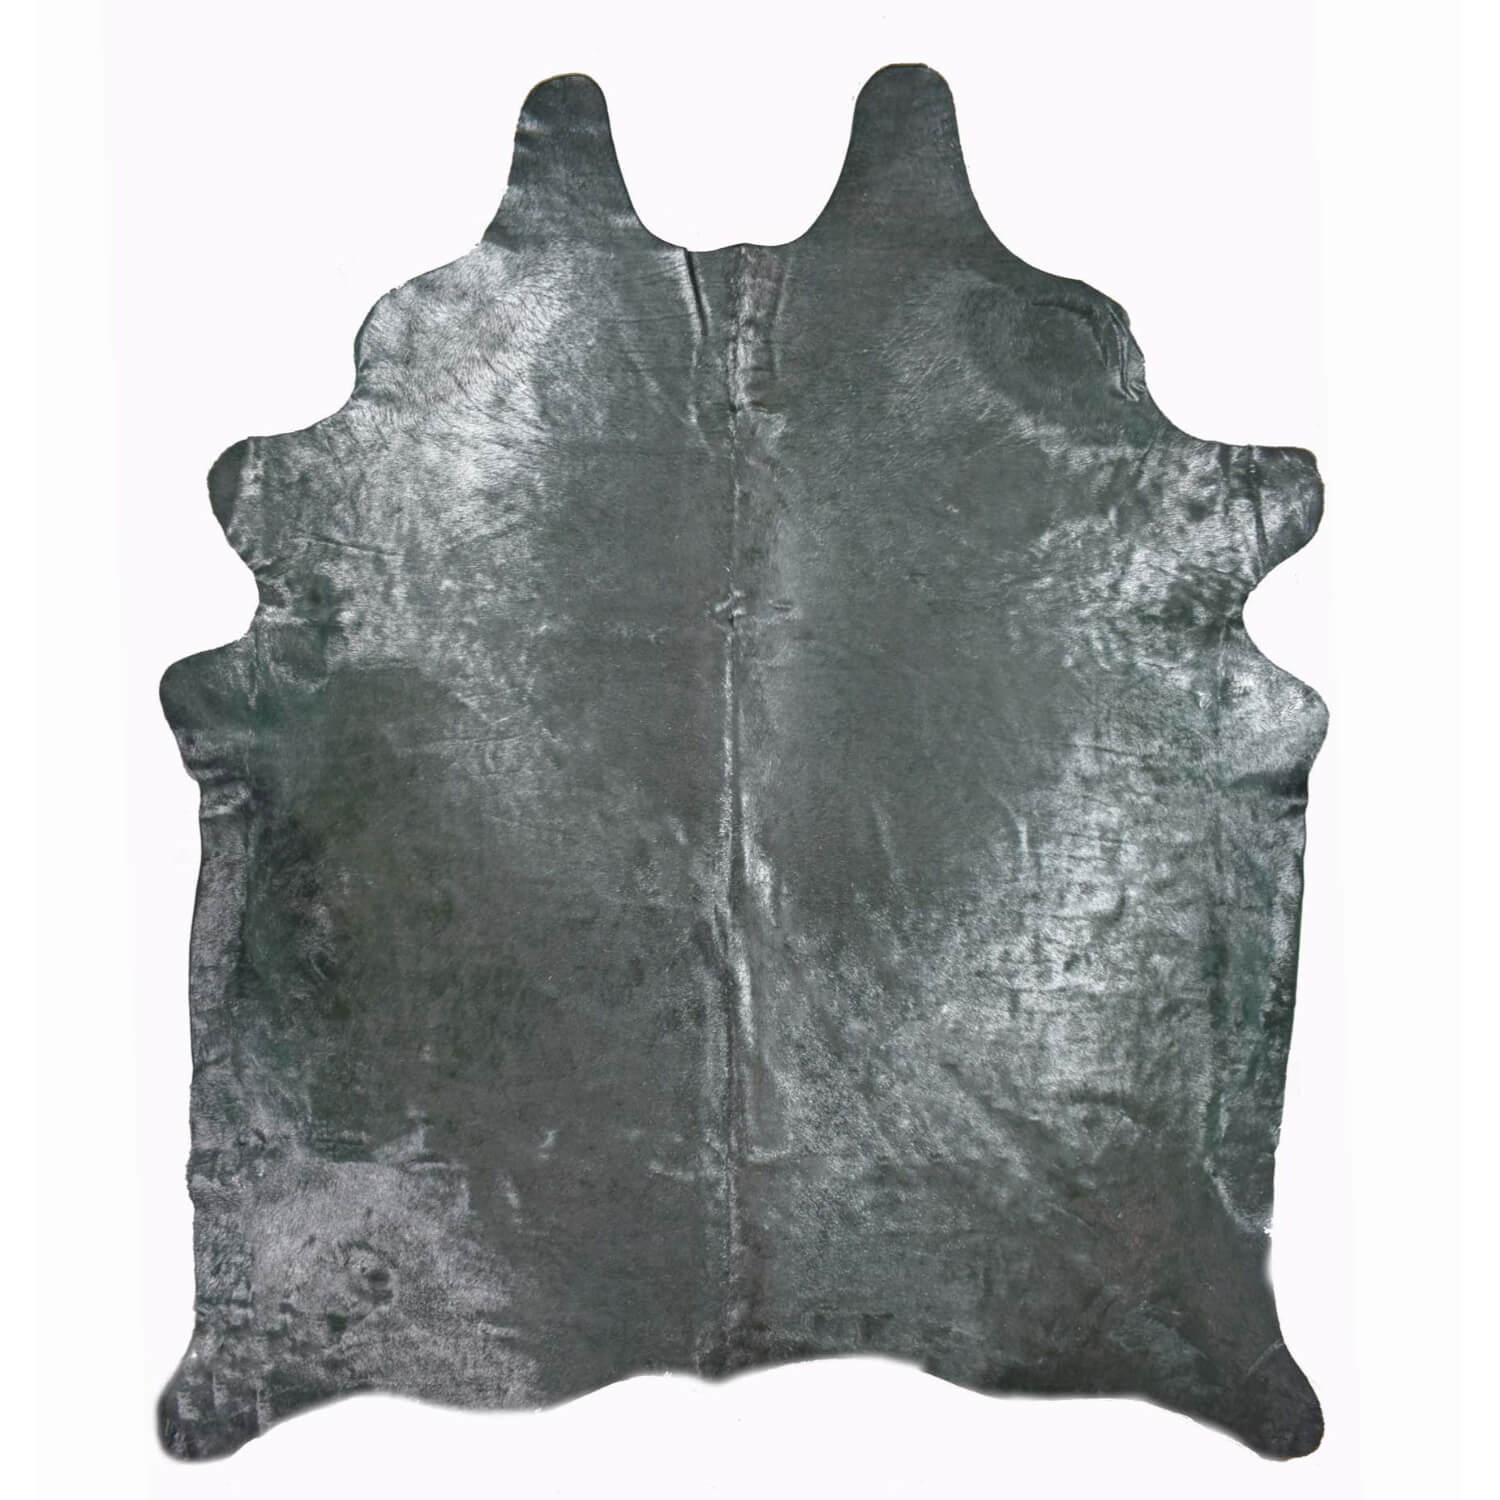 Green with Silver Frost X-Large Brazilian Cowhide Rug 6'0H x 7'5 W #1001GRNSF by Hudson Hides